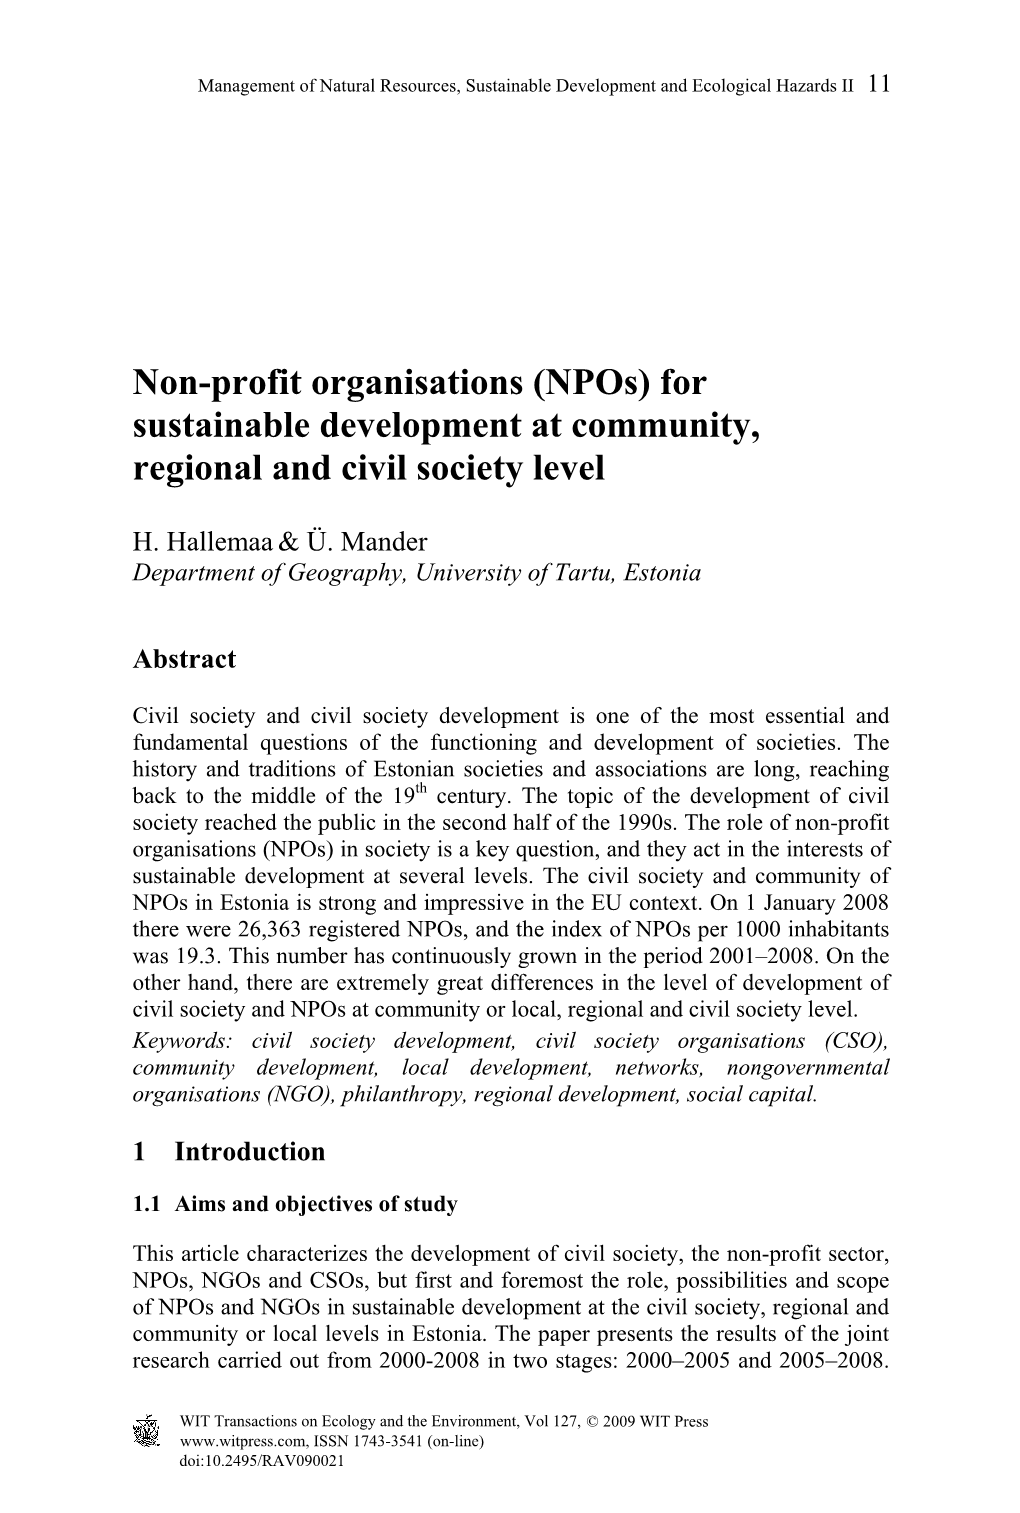 Non-Profit Organisations (Npos) for Sustainable Development at Community, Regional and Civil Society Level